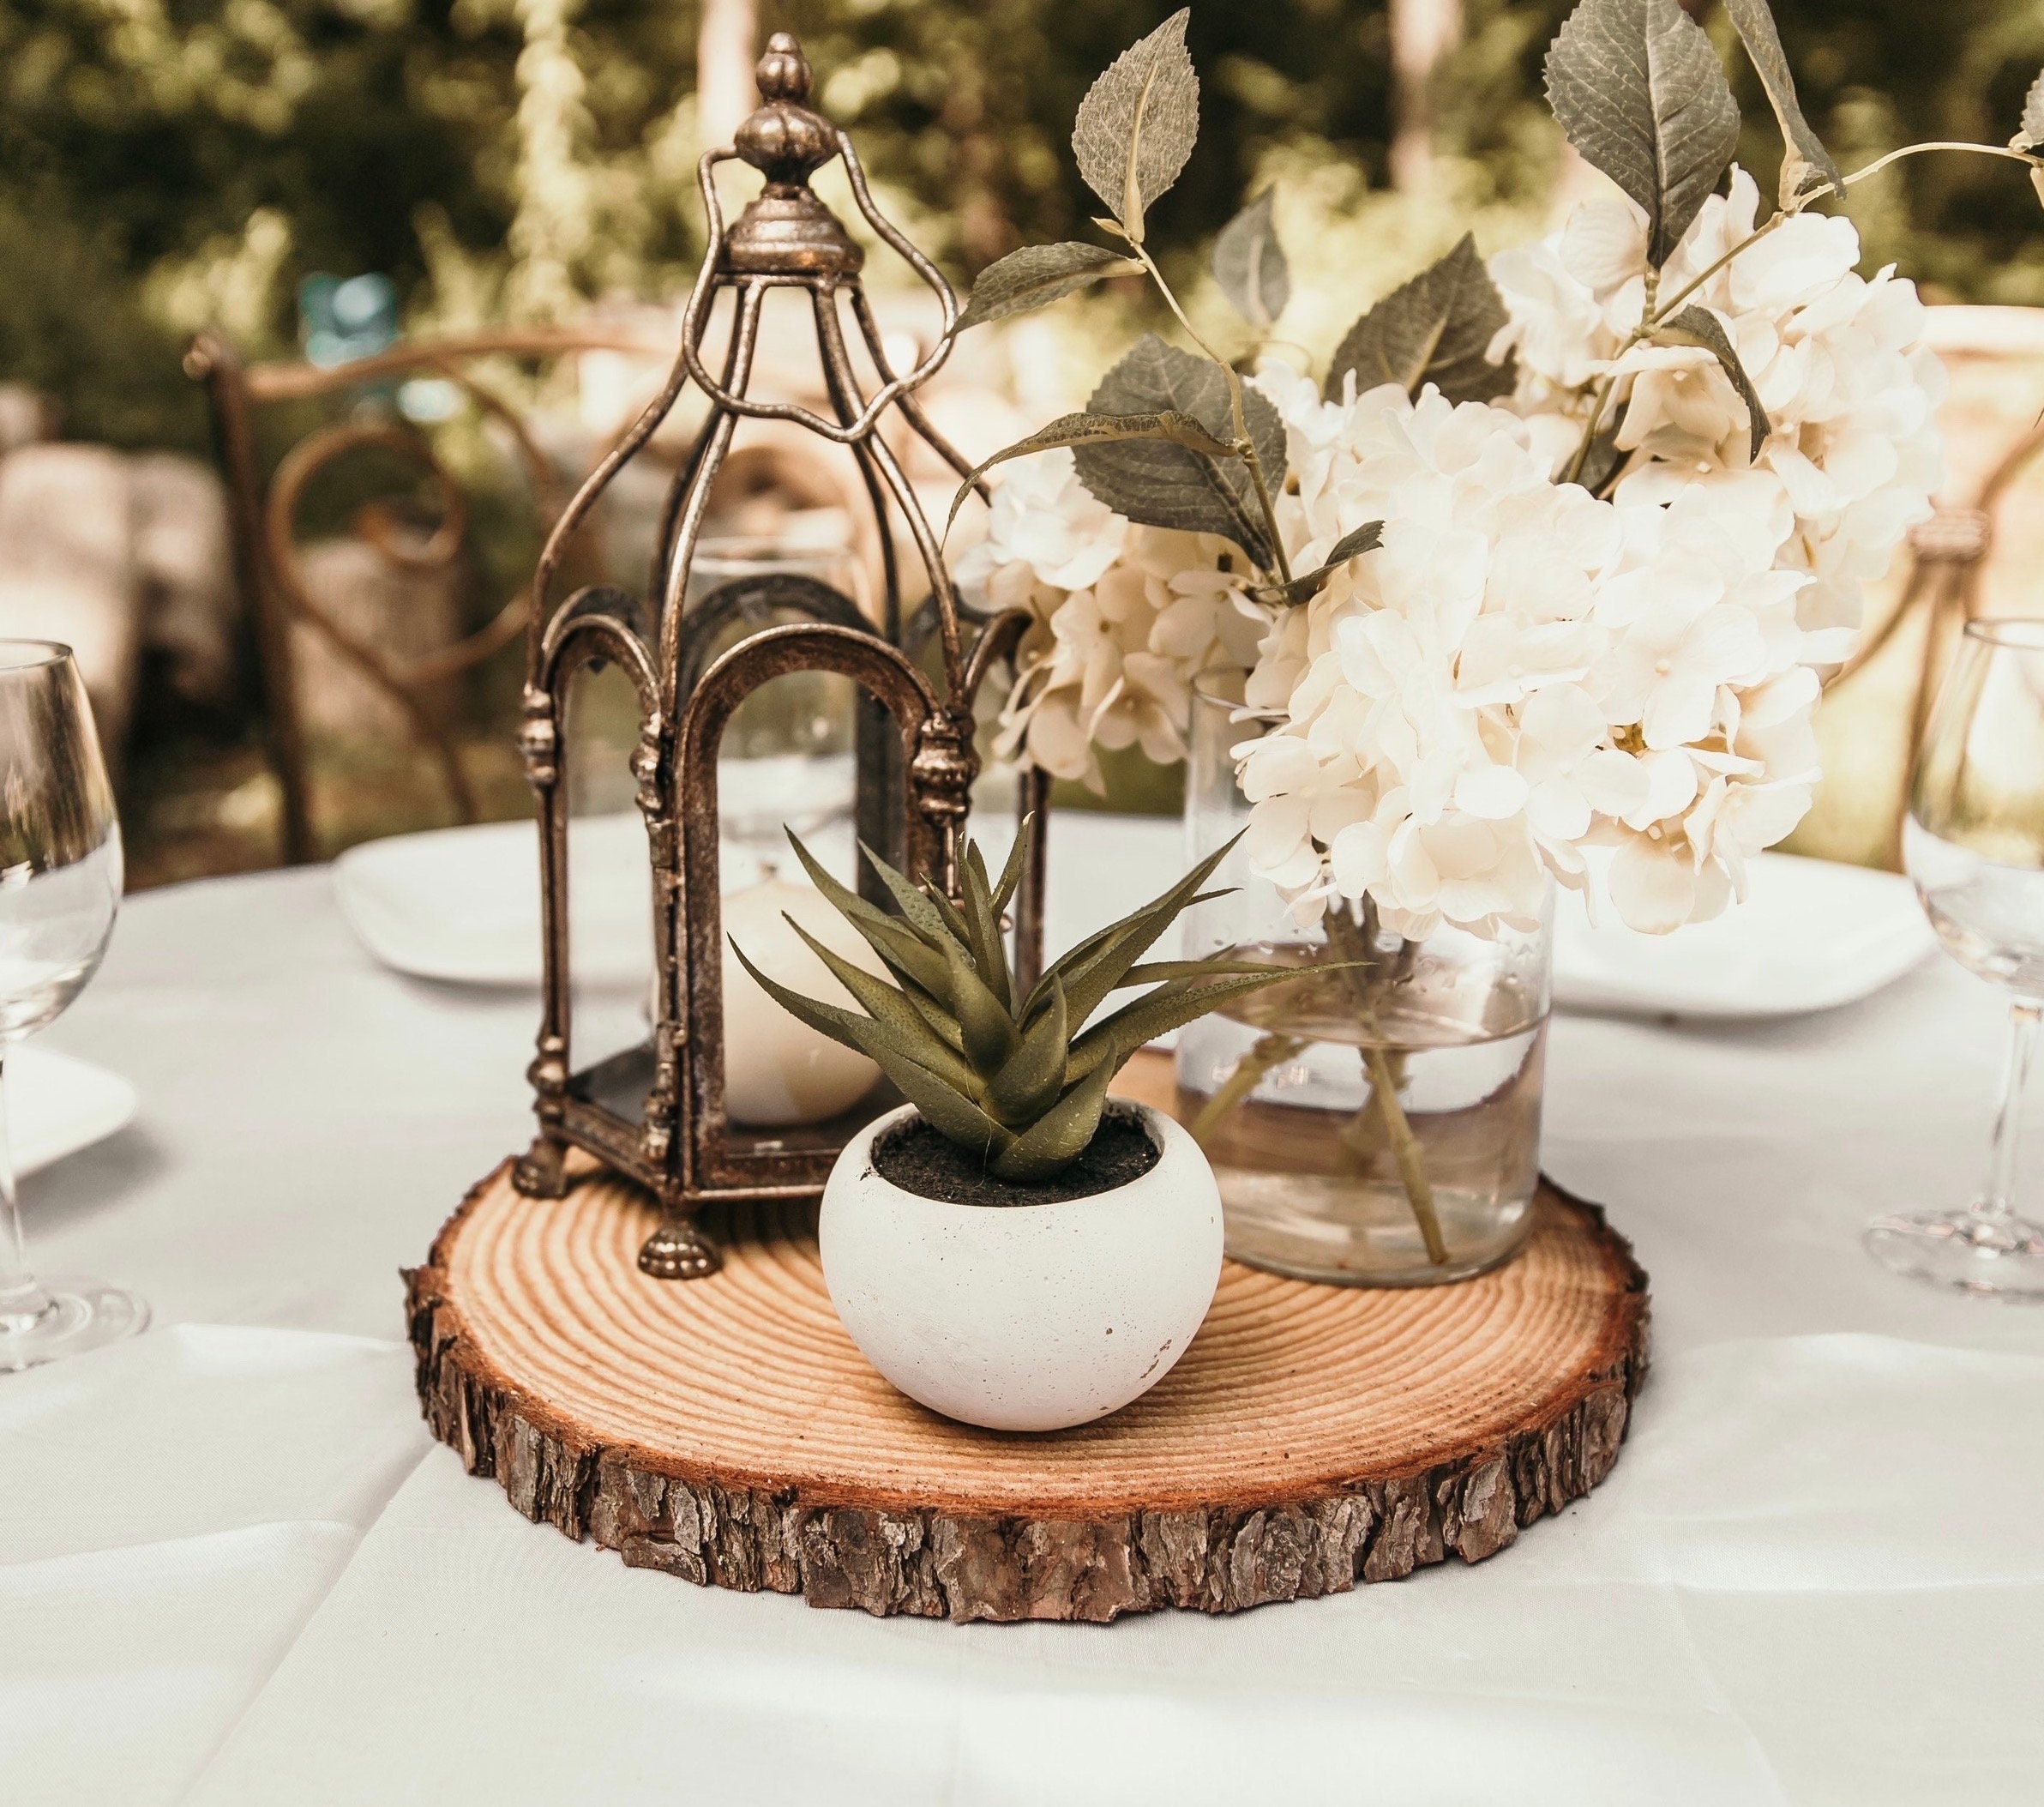 Wood Rounds for Centerpieces  Green Gables Farms Wedding & Events